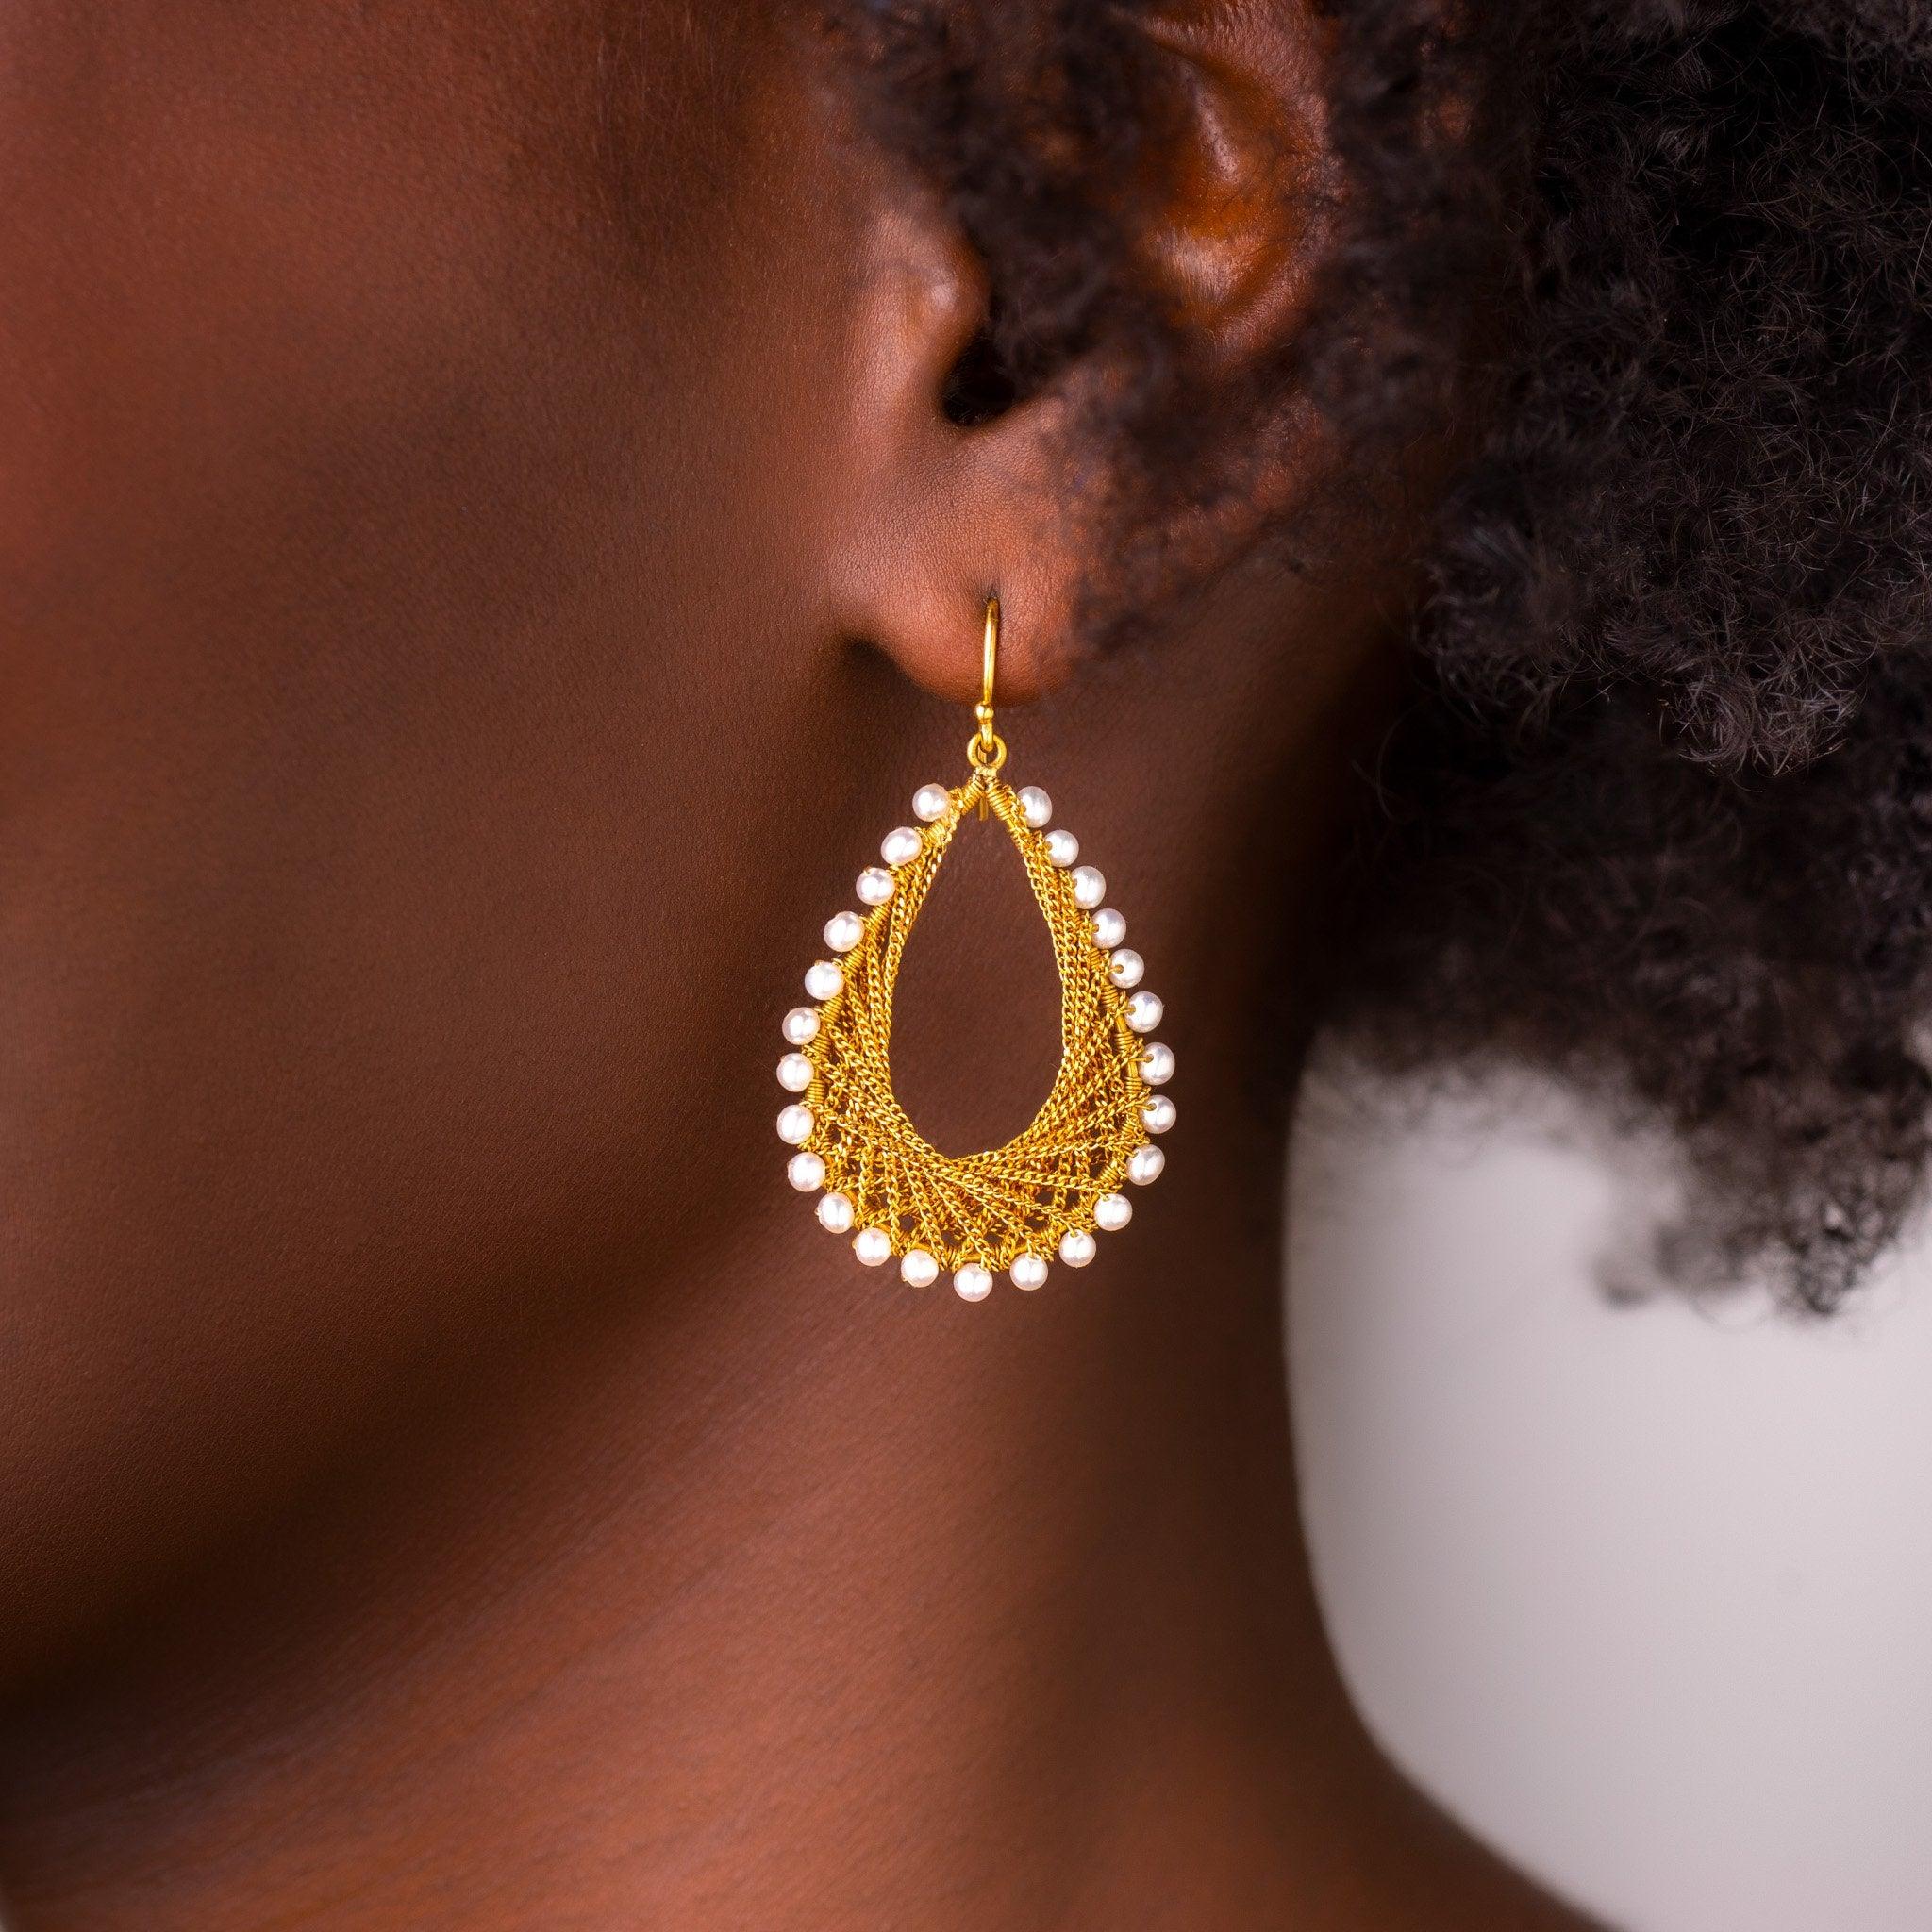 These distinctive earrings feature festoons of gold chain delicately woven into a shimmering web adorned with creamy Pearls. The smooth surface of the Pearls emanates a lustrous glow, like dewdrops in moonlight. The effect is subtle, sensual, and